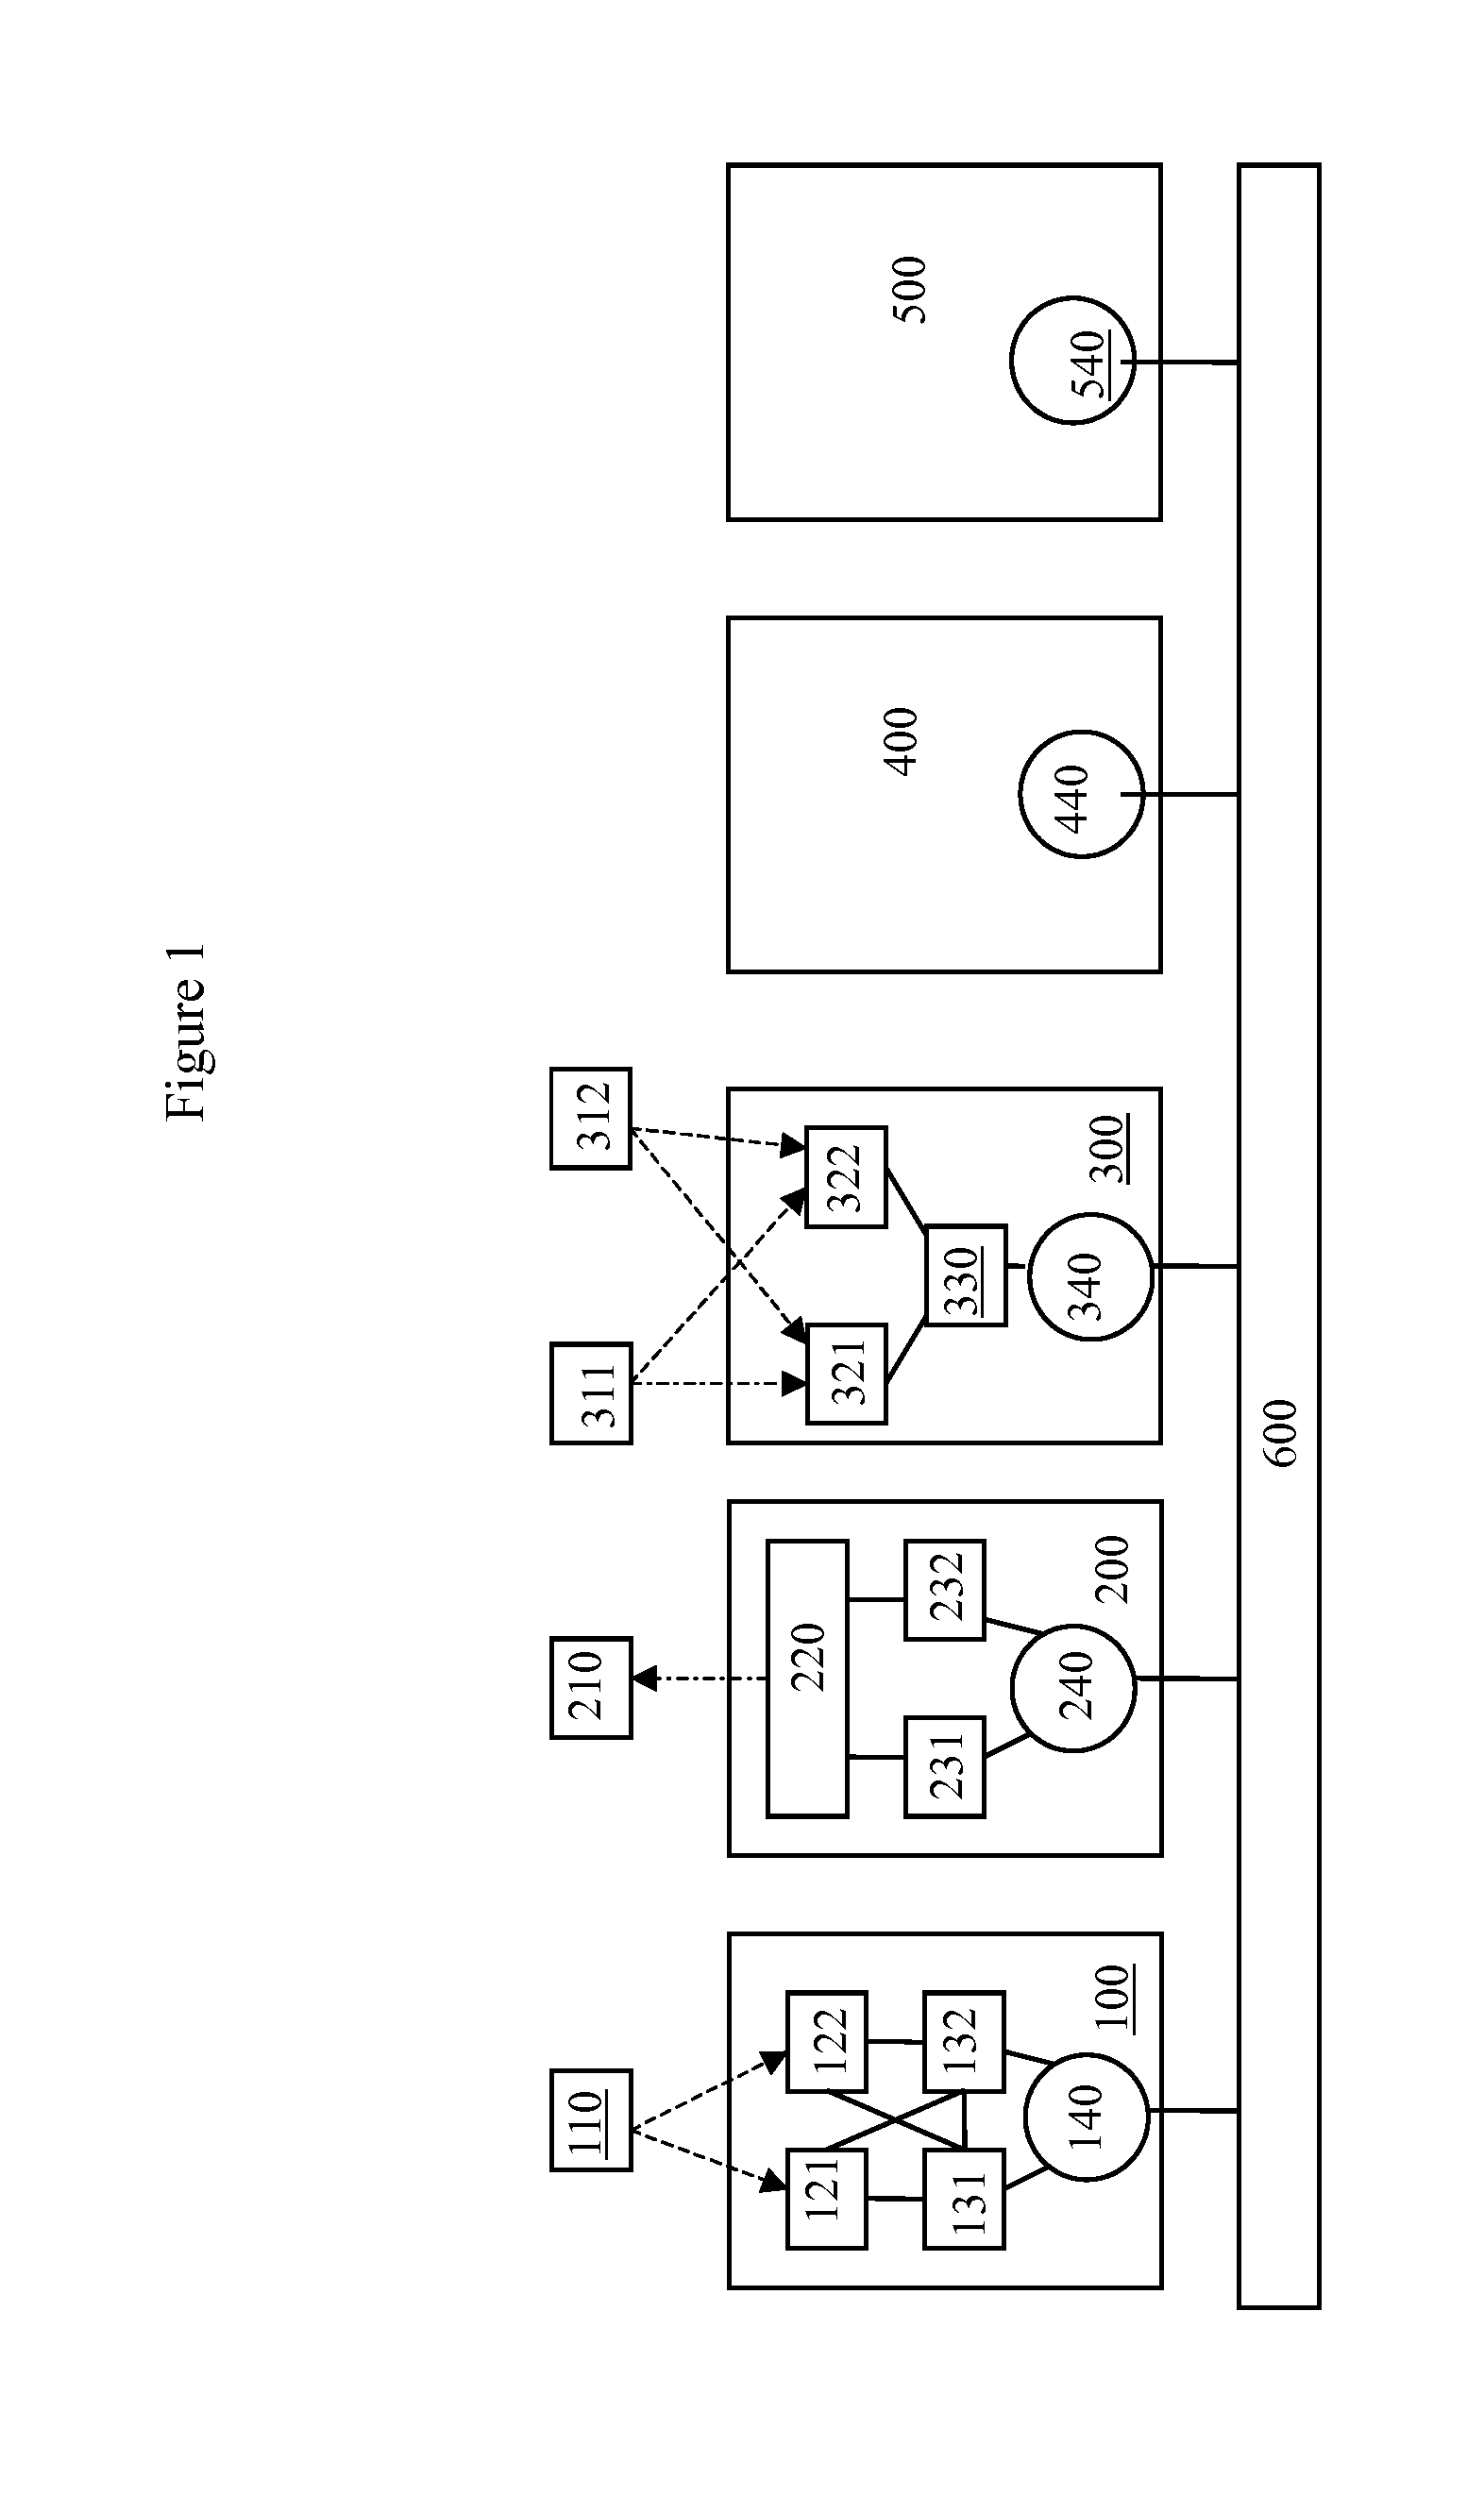 Method and System for Secure Transmission of Process Data to be Transmitted Cyclically